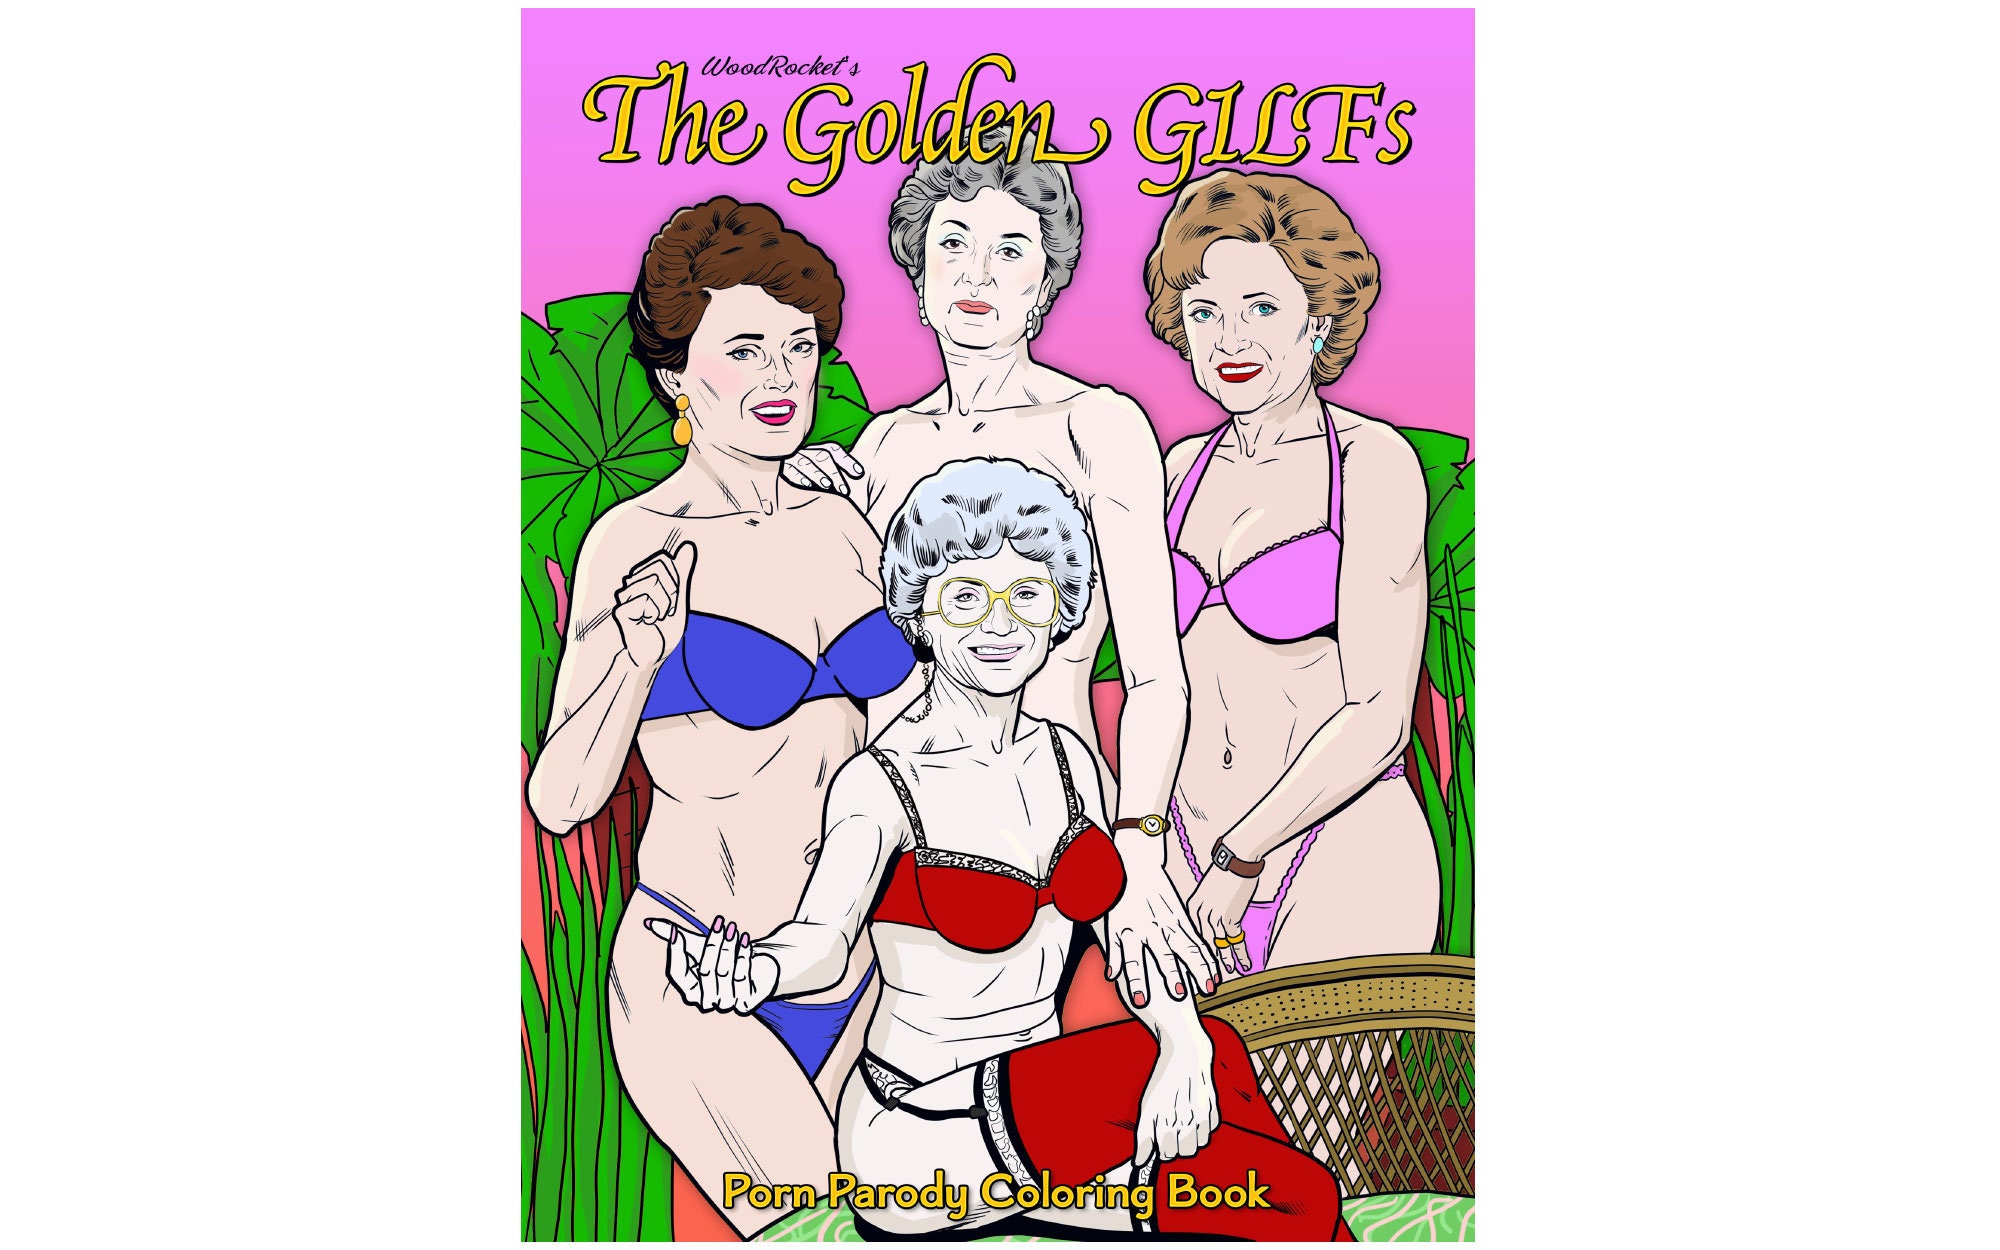 The Golden Gilfs Golden Girls Adult Parody Coloring Book photo